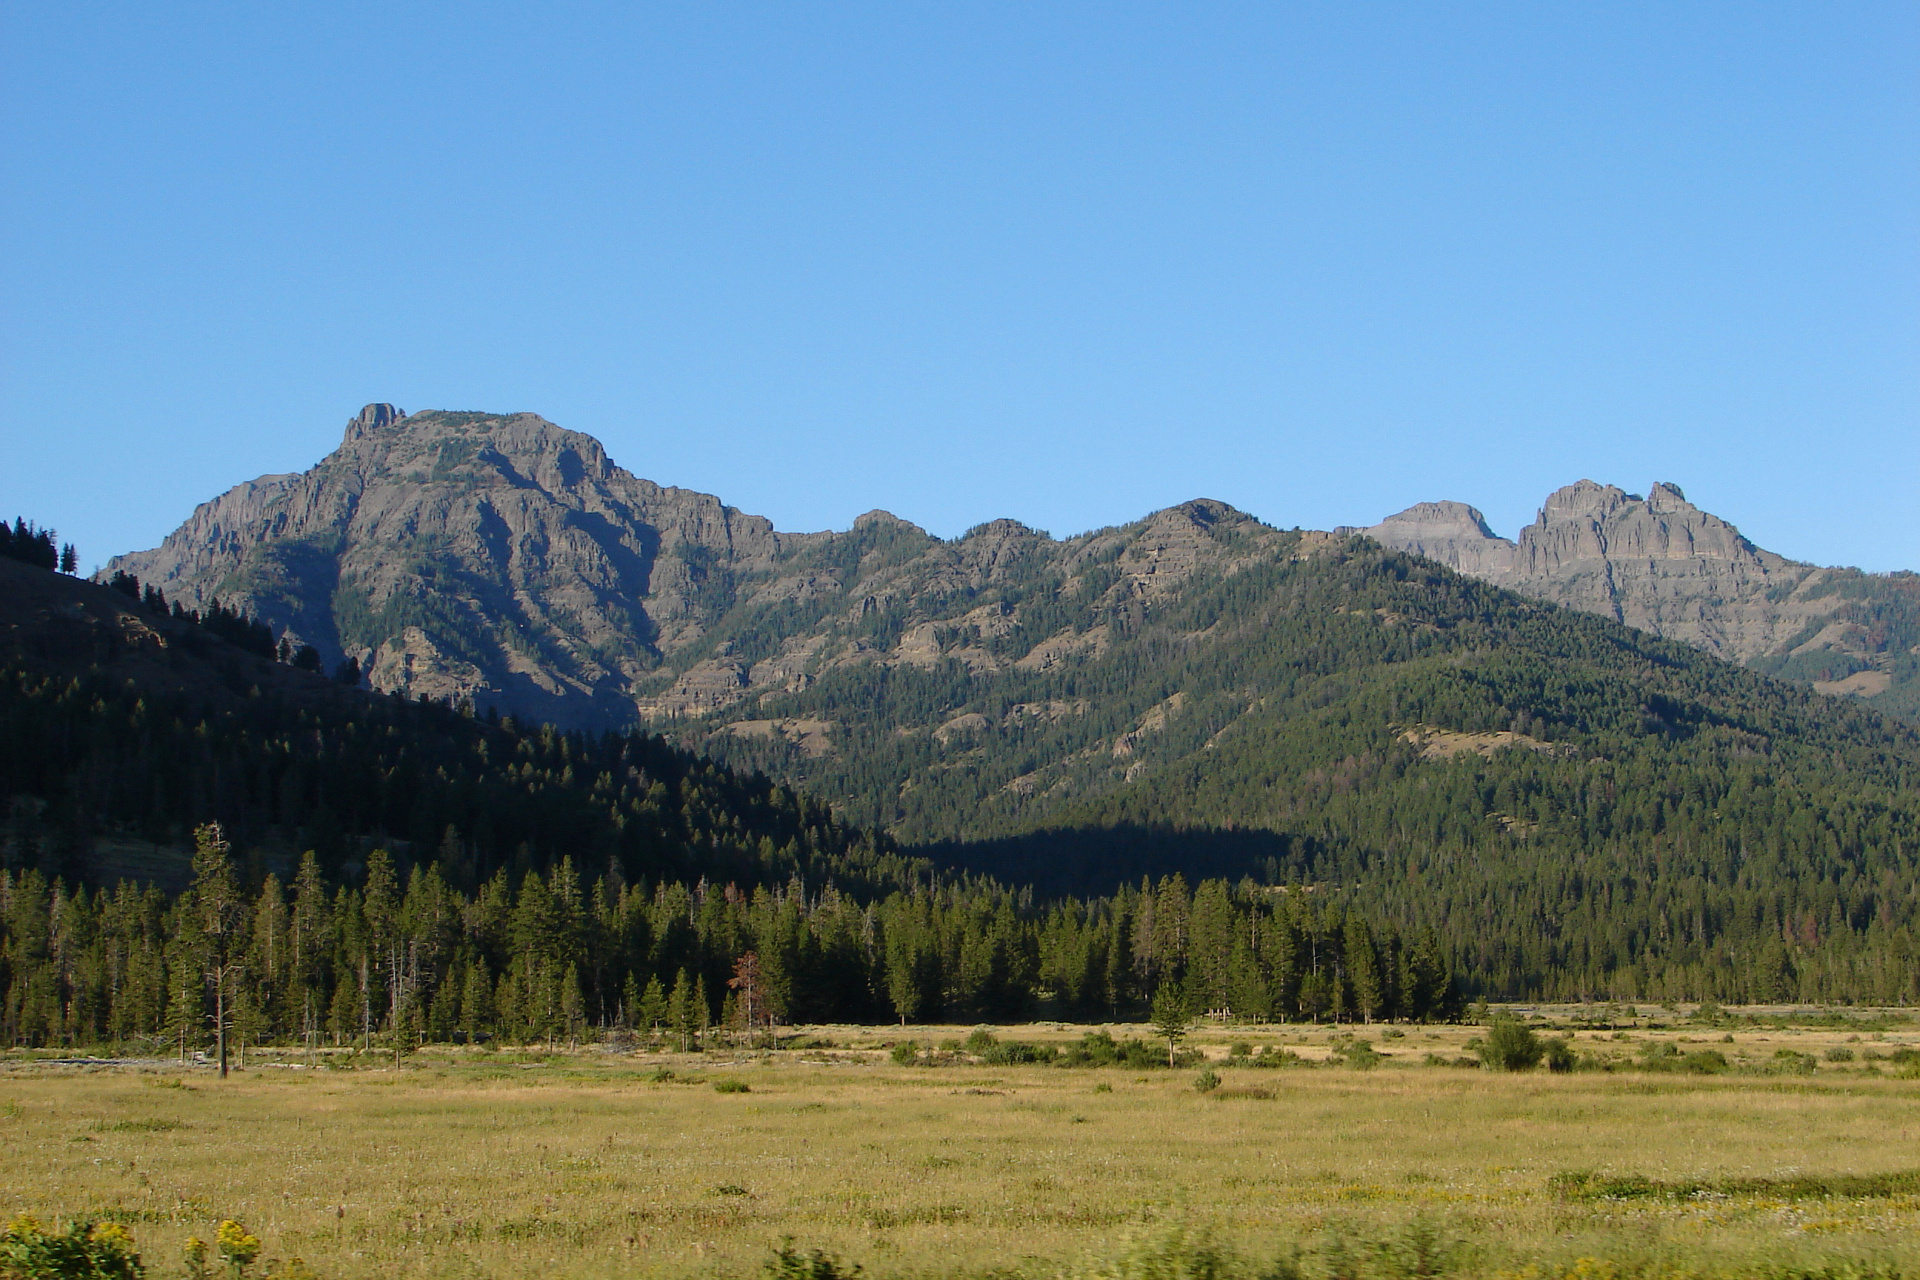 Abiathar Peak and Amphitheater Mountain (Travels » US Trip 1: Cheyenne Country » The Journey » Shoshone National Forest)